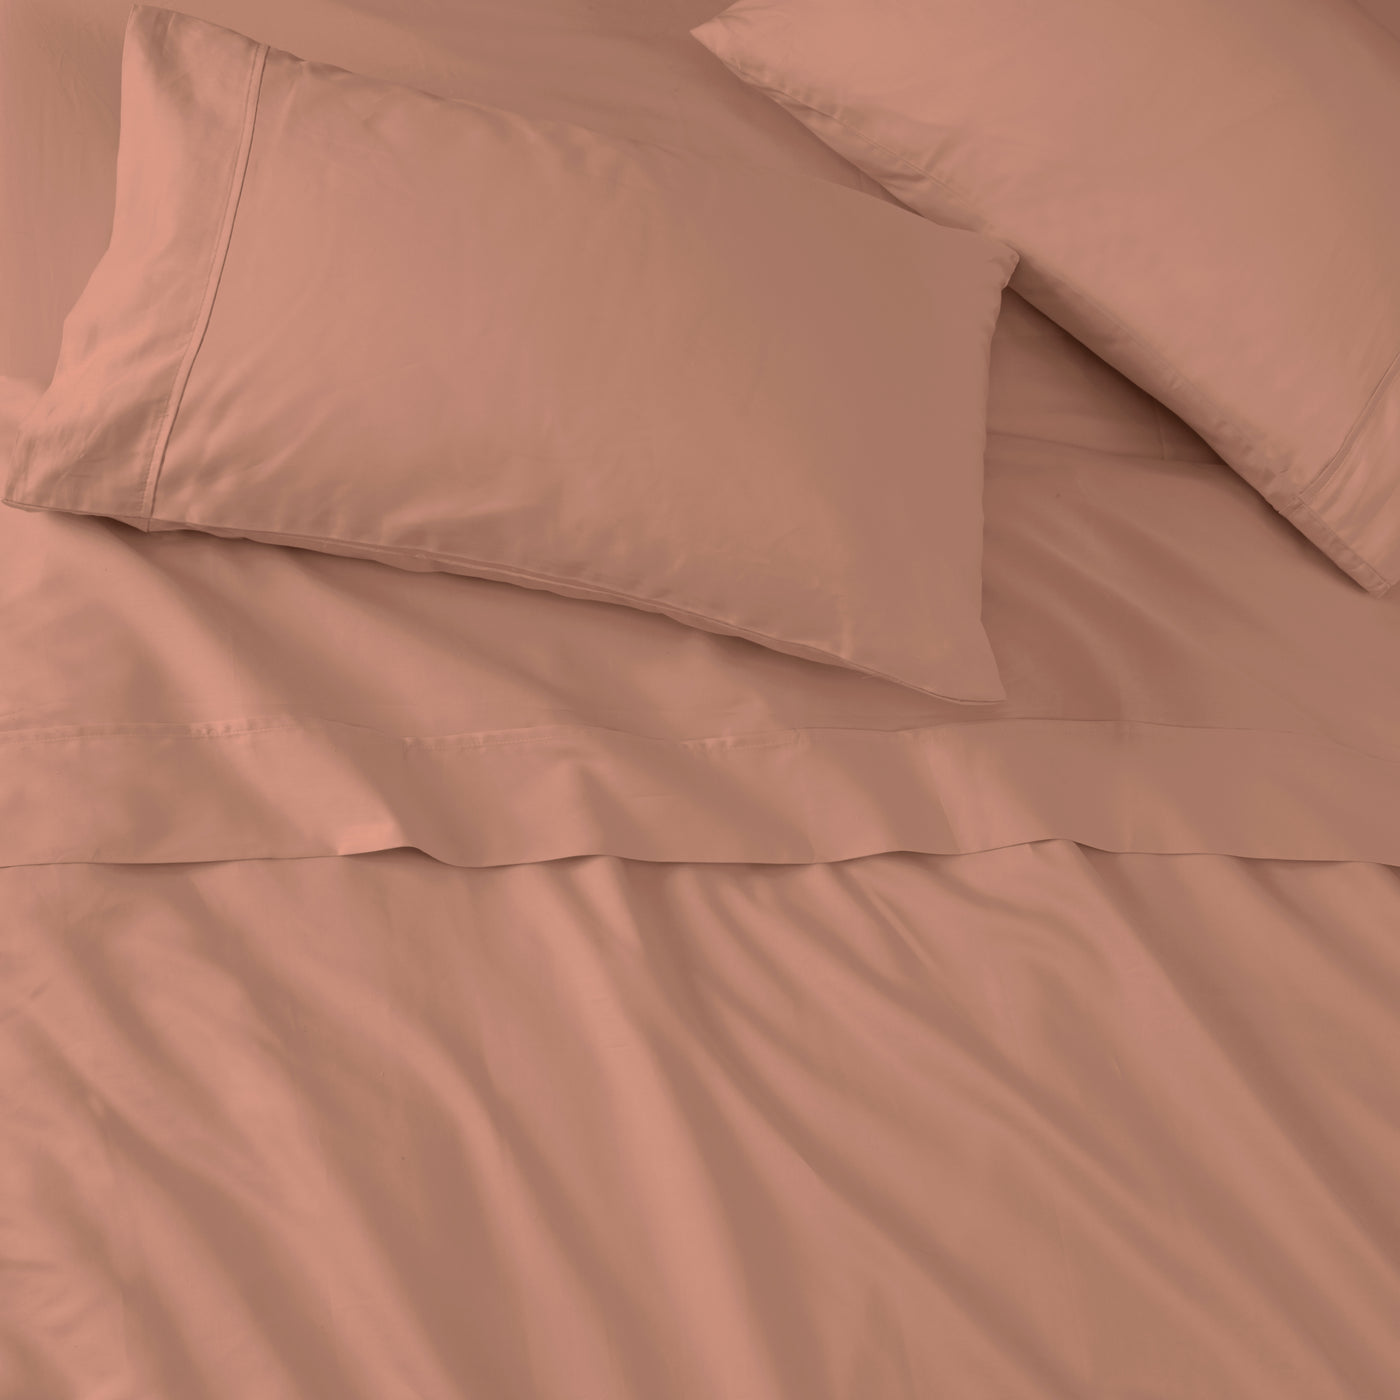 Baystreet Sheet set - Blend of Tencel/Cotton 300TC Bedding Sheets and Pillowcases-Extra Sofy Luxury Bed Sheets- Deep Pocket upto 15inch, BURNT SIENNA